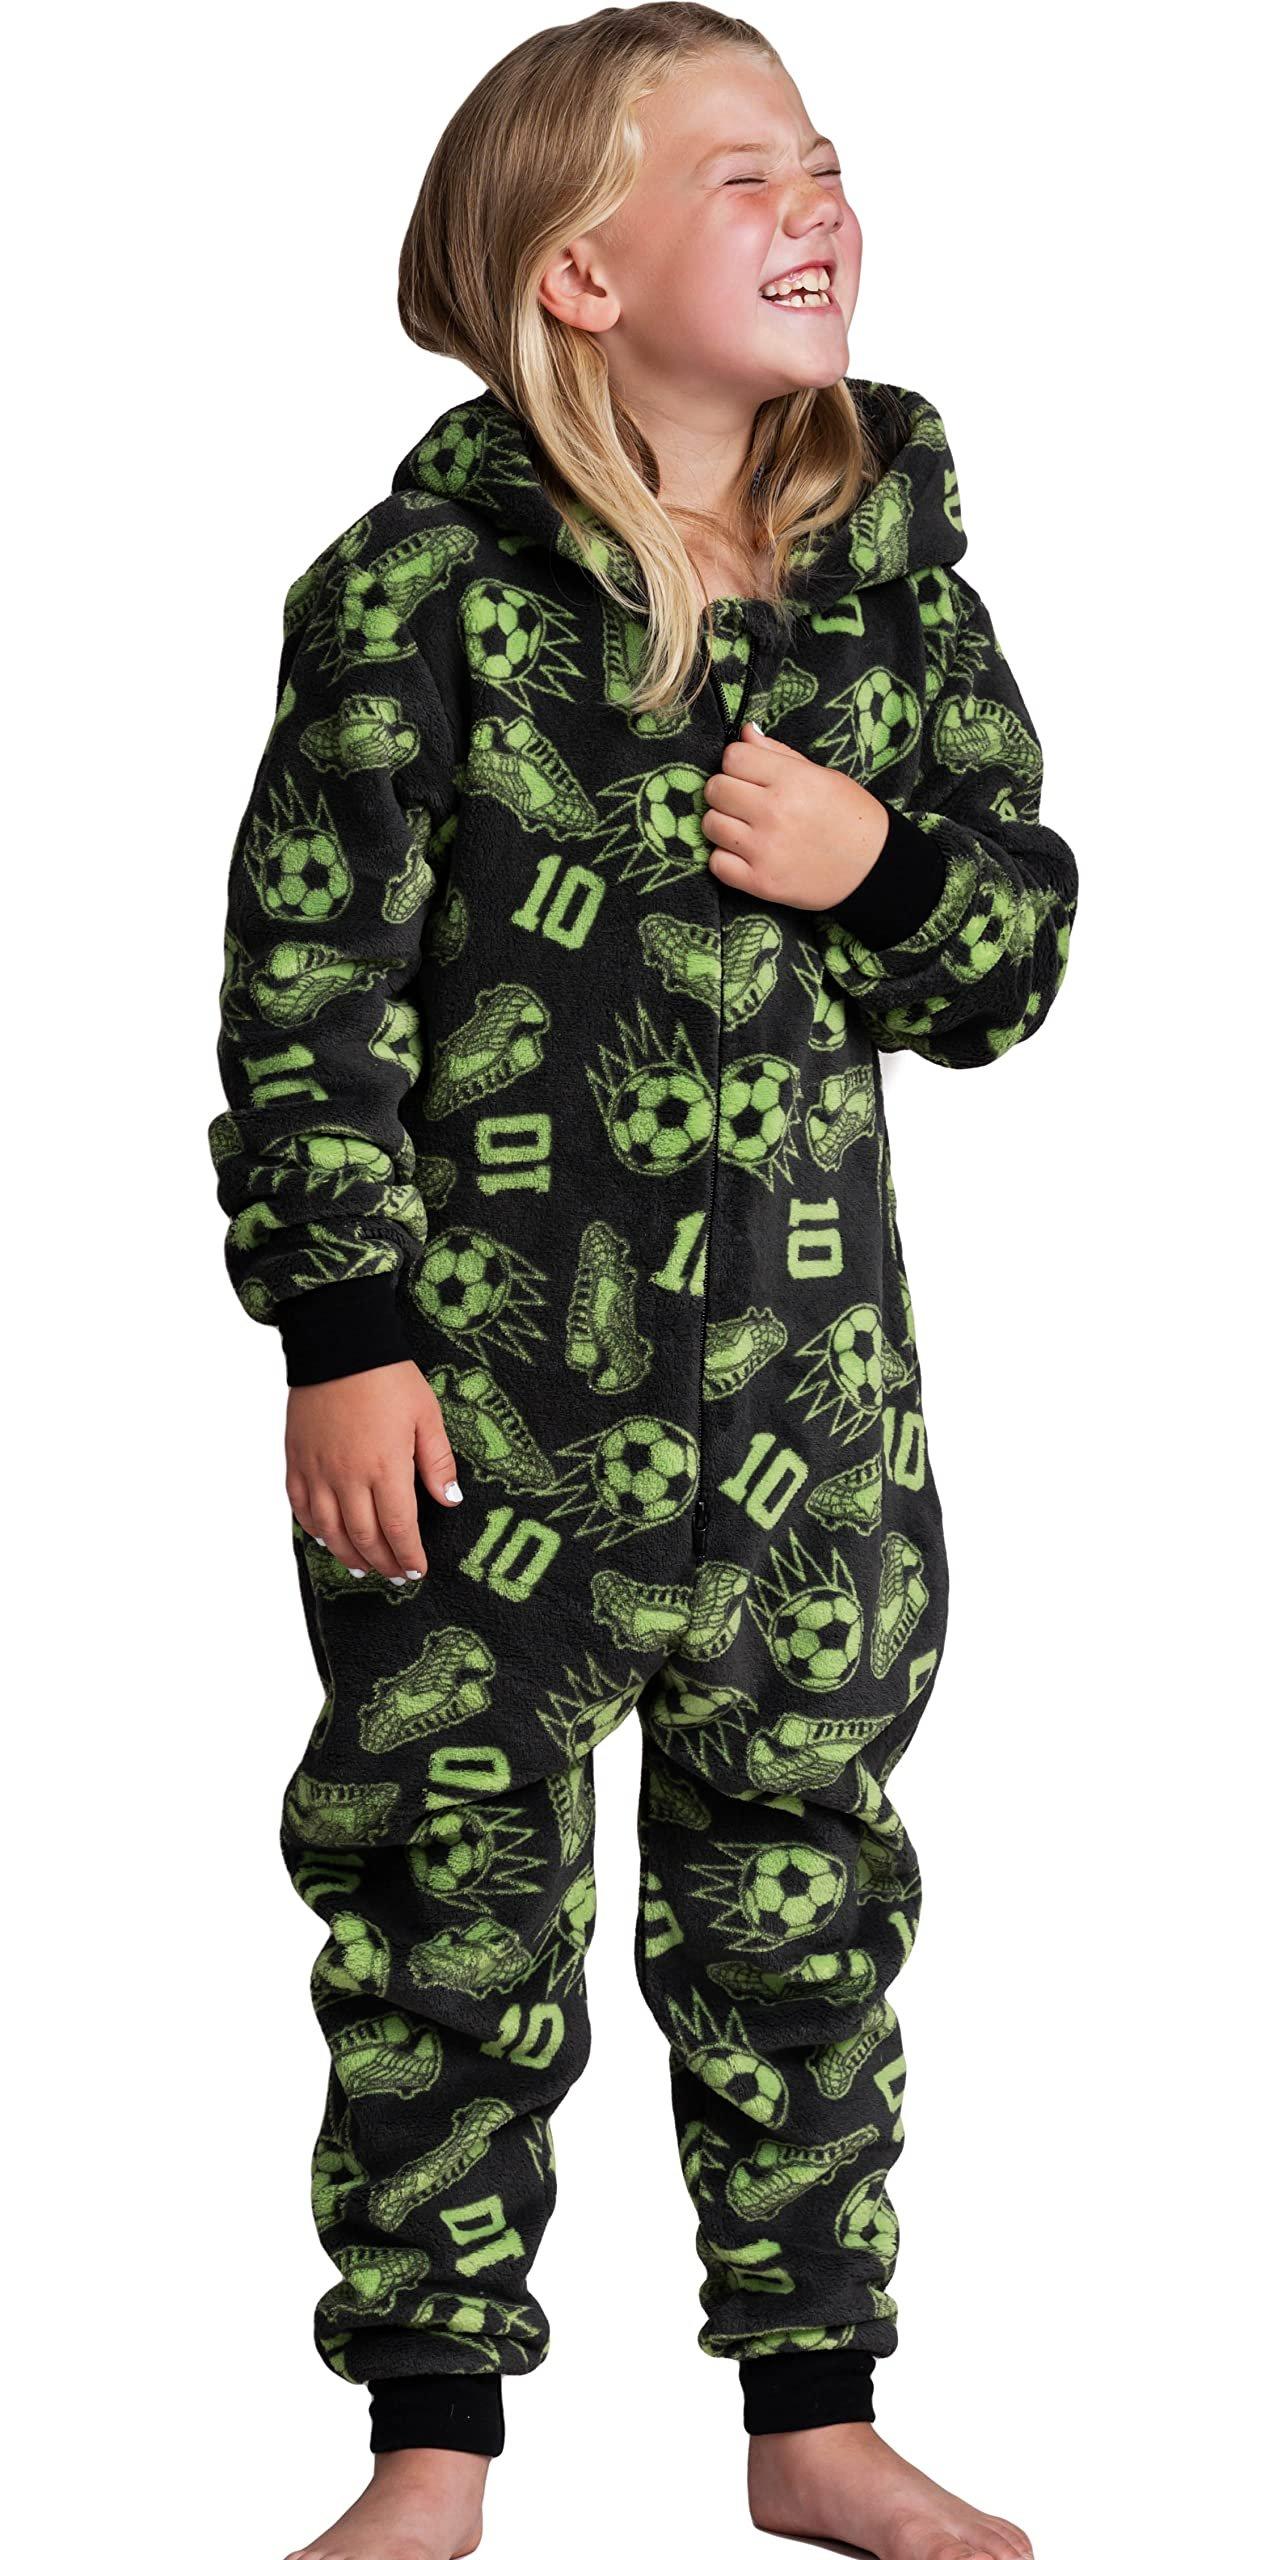 Football Onesie All-In-One in a SuperSoft Fleece